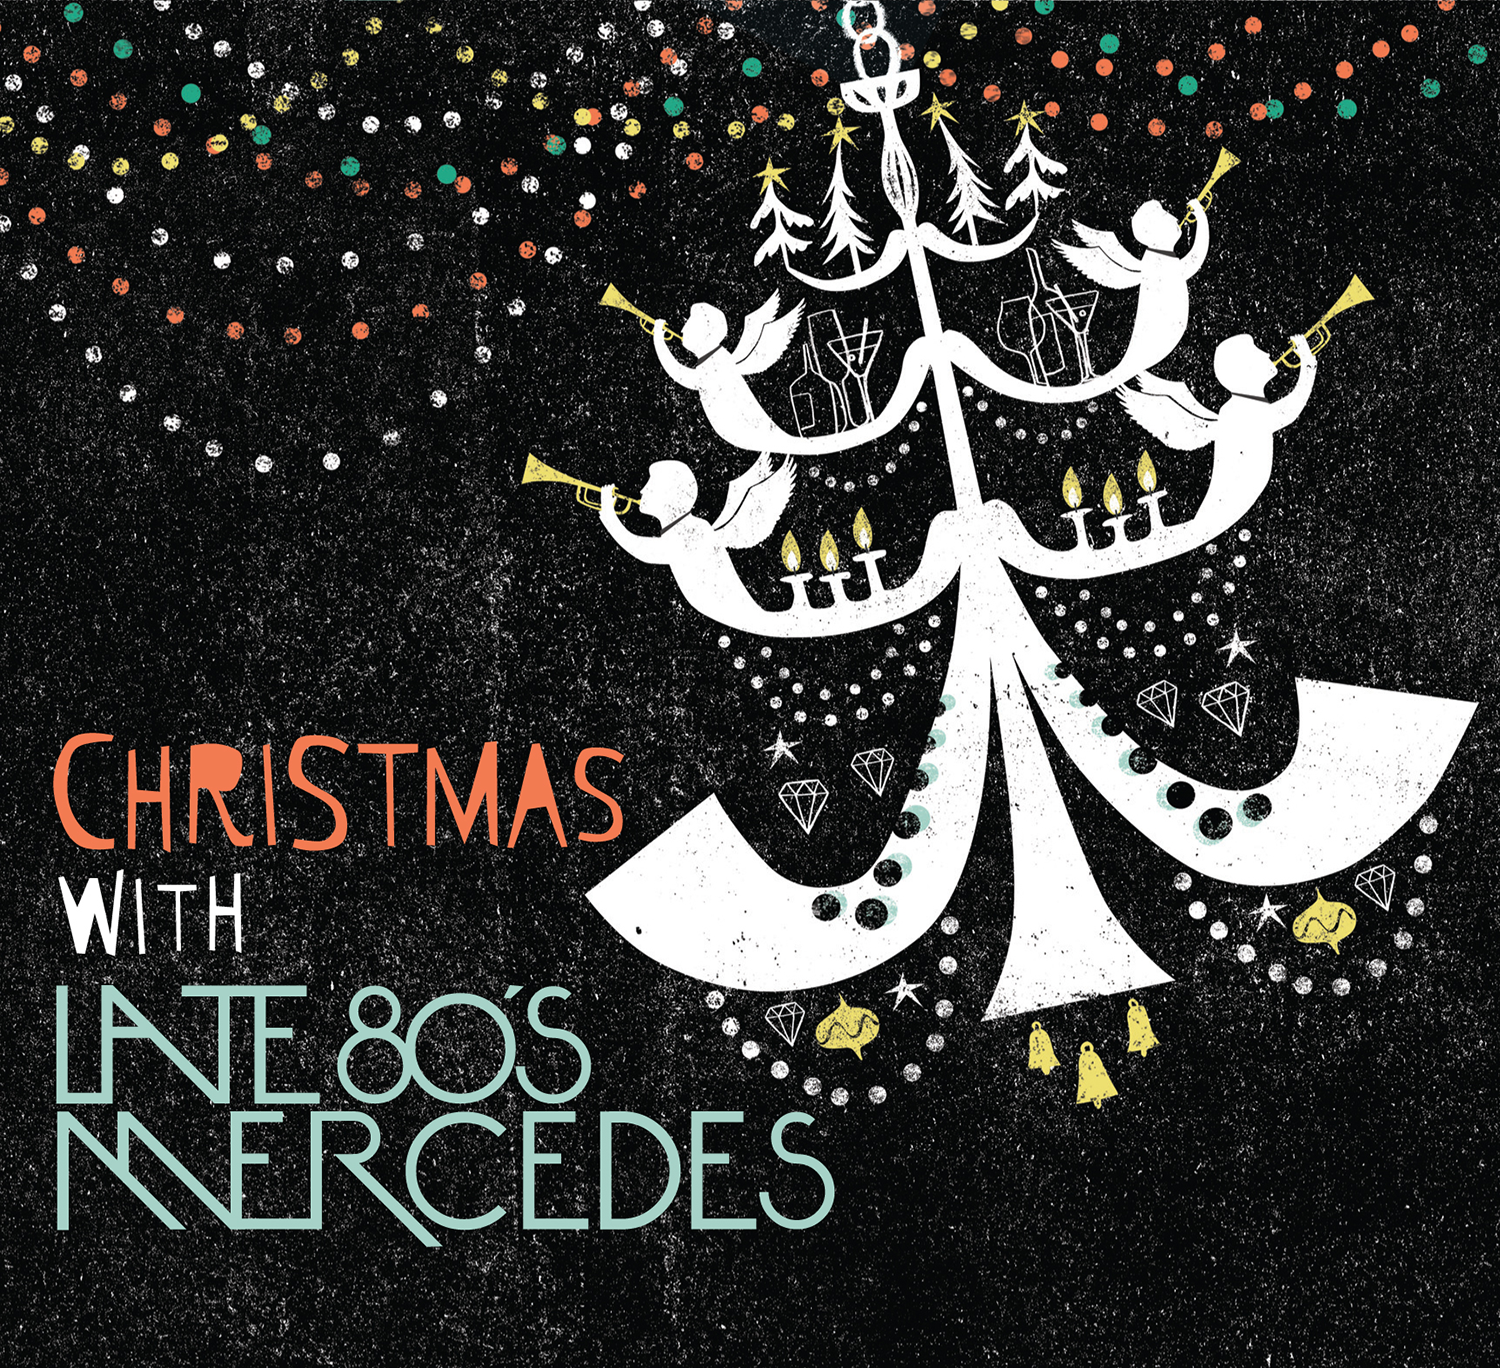 AK_Late80sMercedes_ChristmasCD_Cover.png